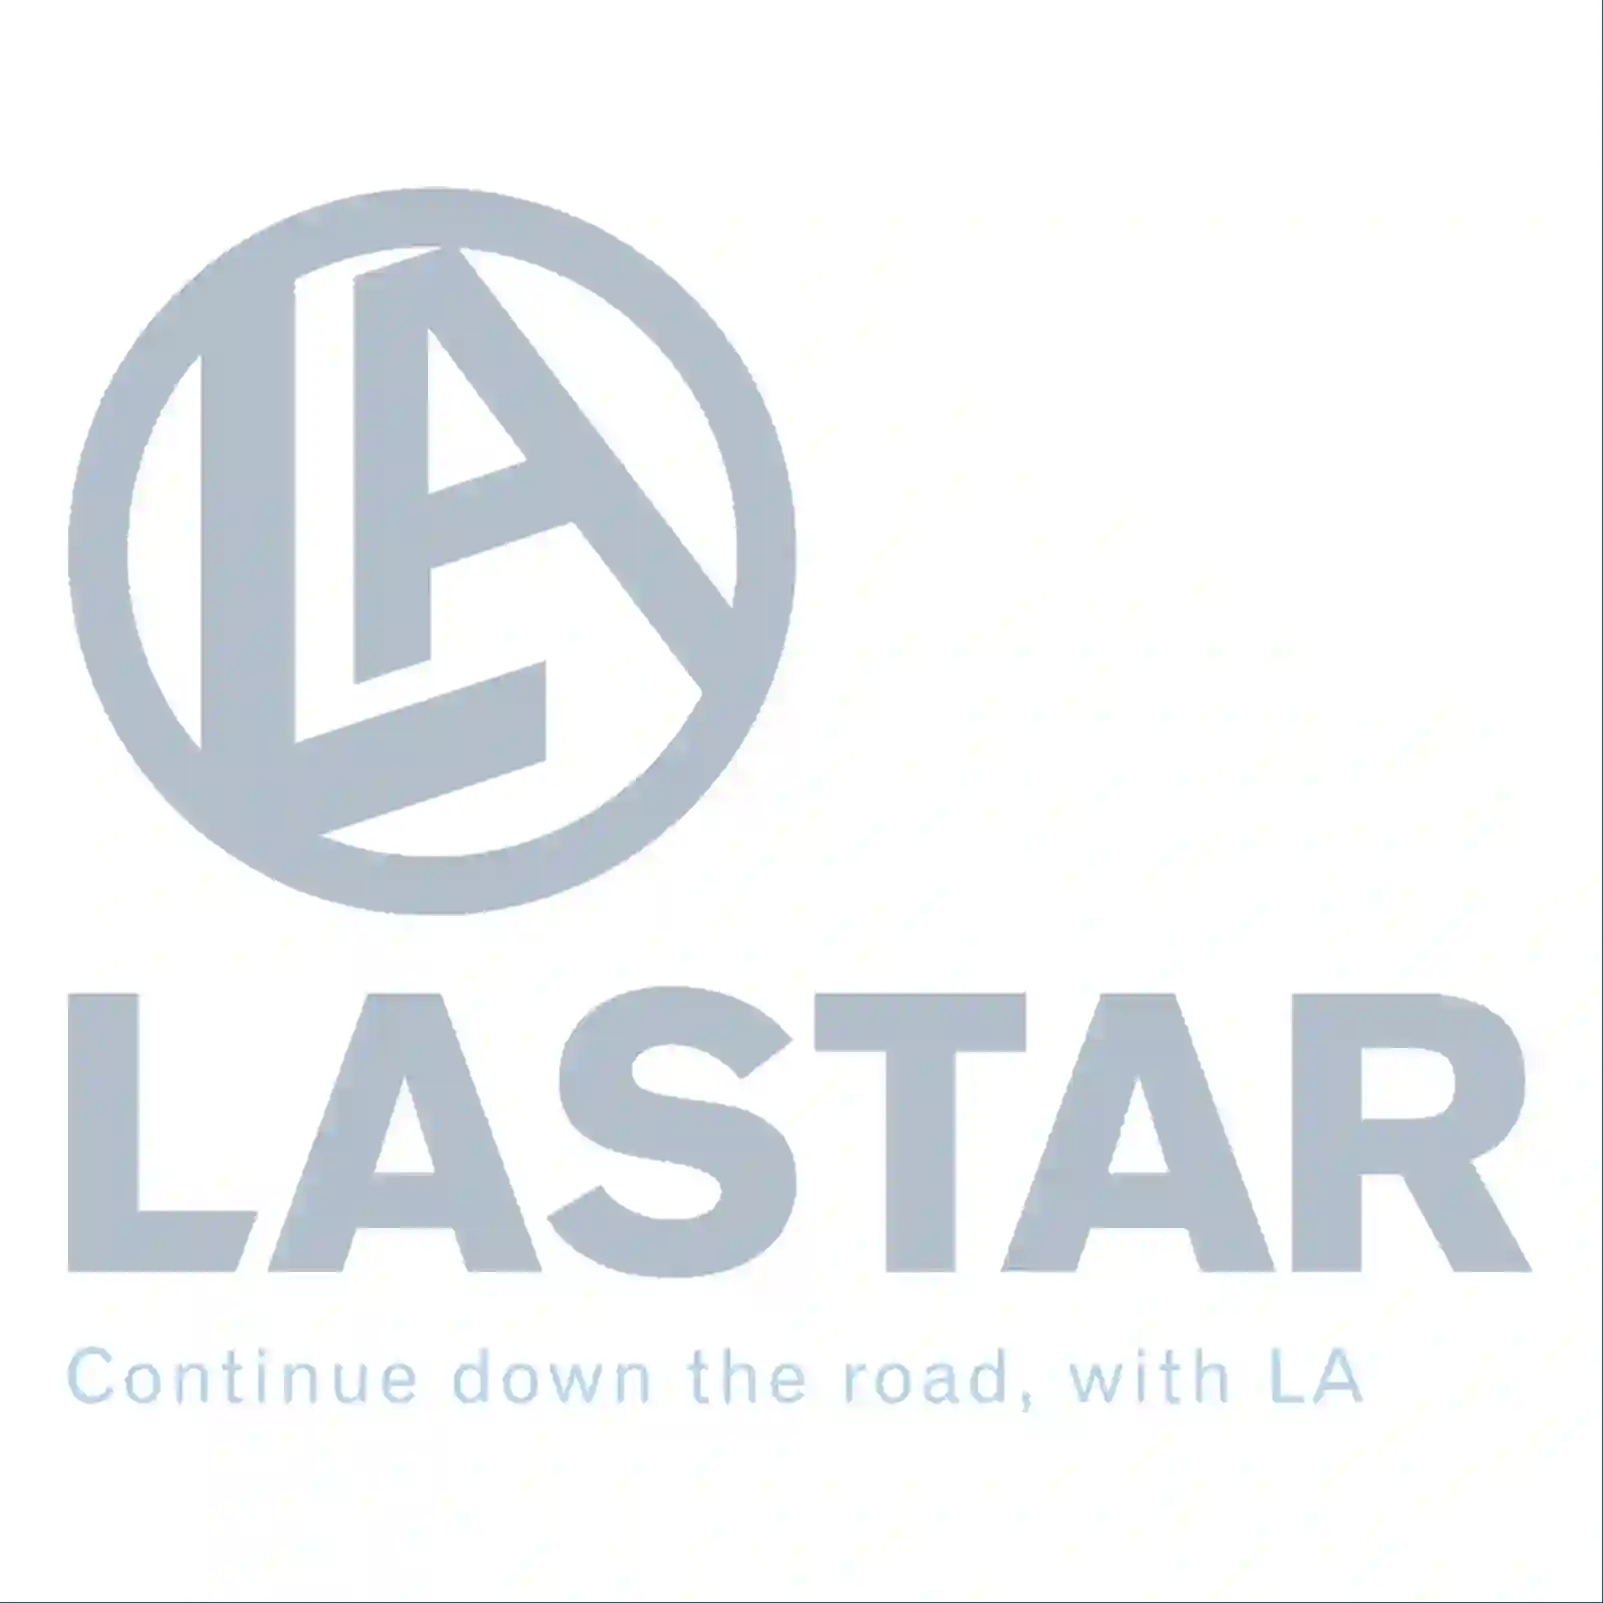 Step, right, 77719773, 1641631 ||  77719773 Lastar Spare Part | Truck Spare Parts, Auotomotive Spare Parts Step, right, 77719773, 1641631 ||  77719773 Lastar Spare Part | Truck Spare Parts, Auotomotive Spare Parts